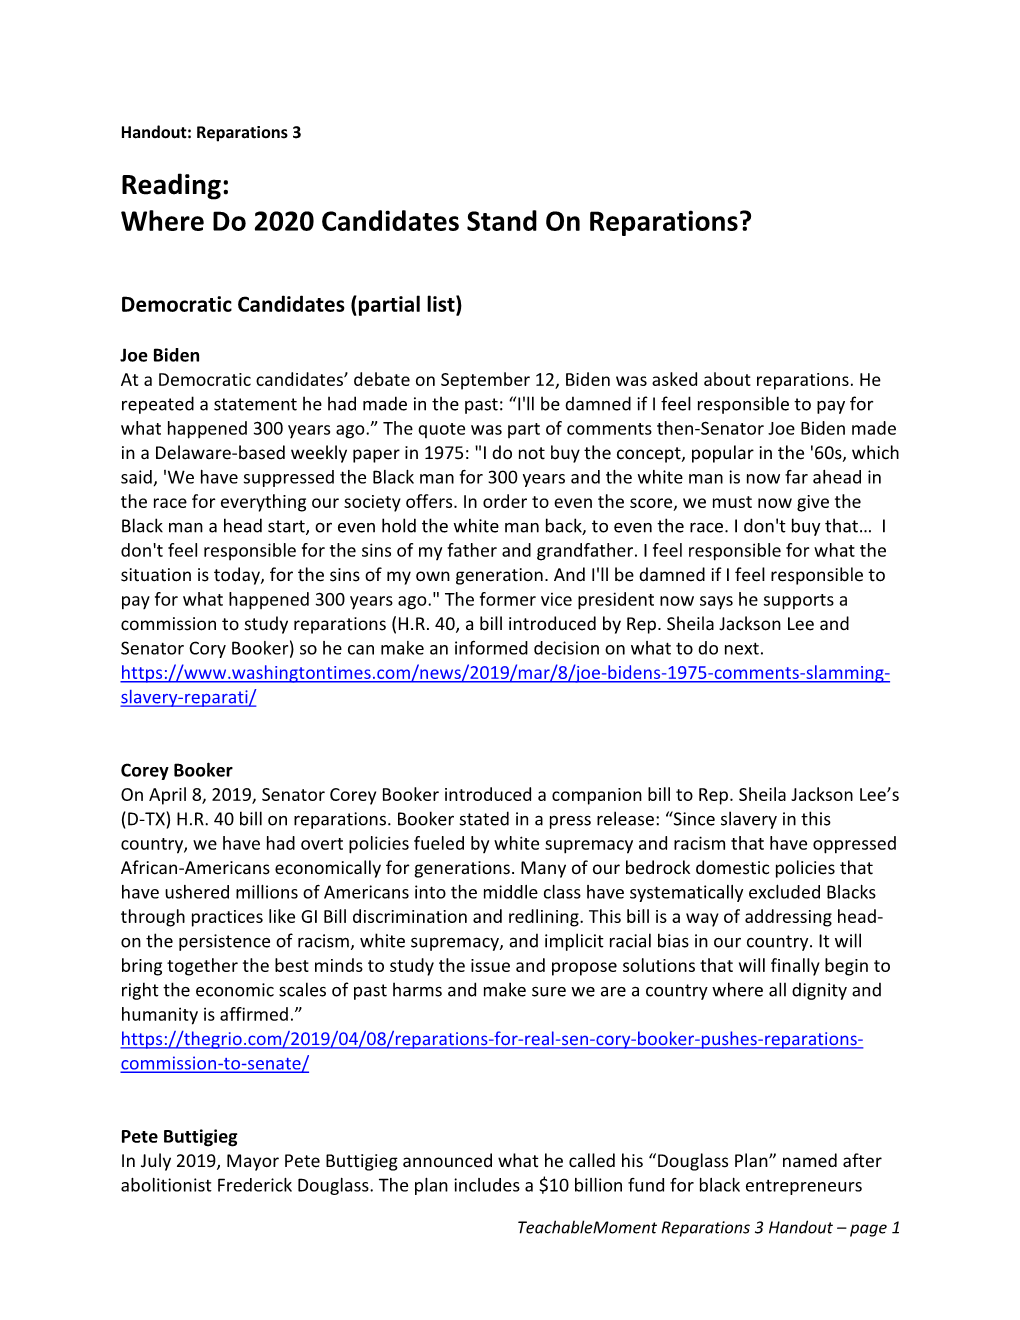 Where Do 2020 Candidates Stand on Reparations?